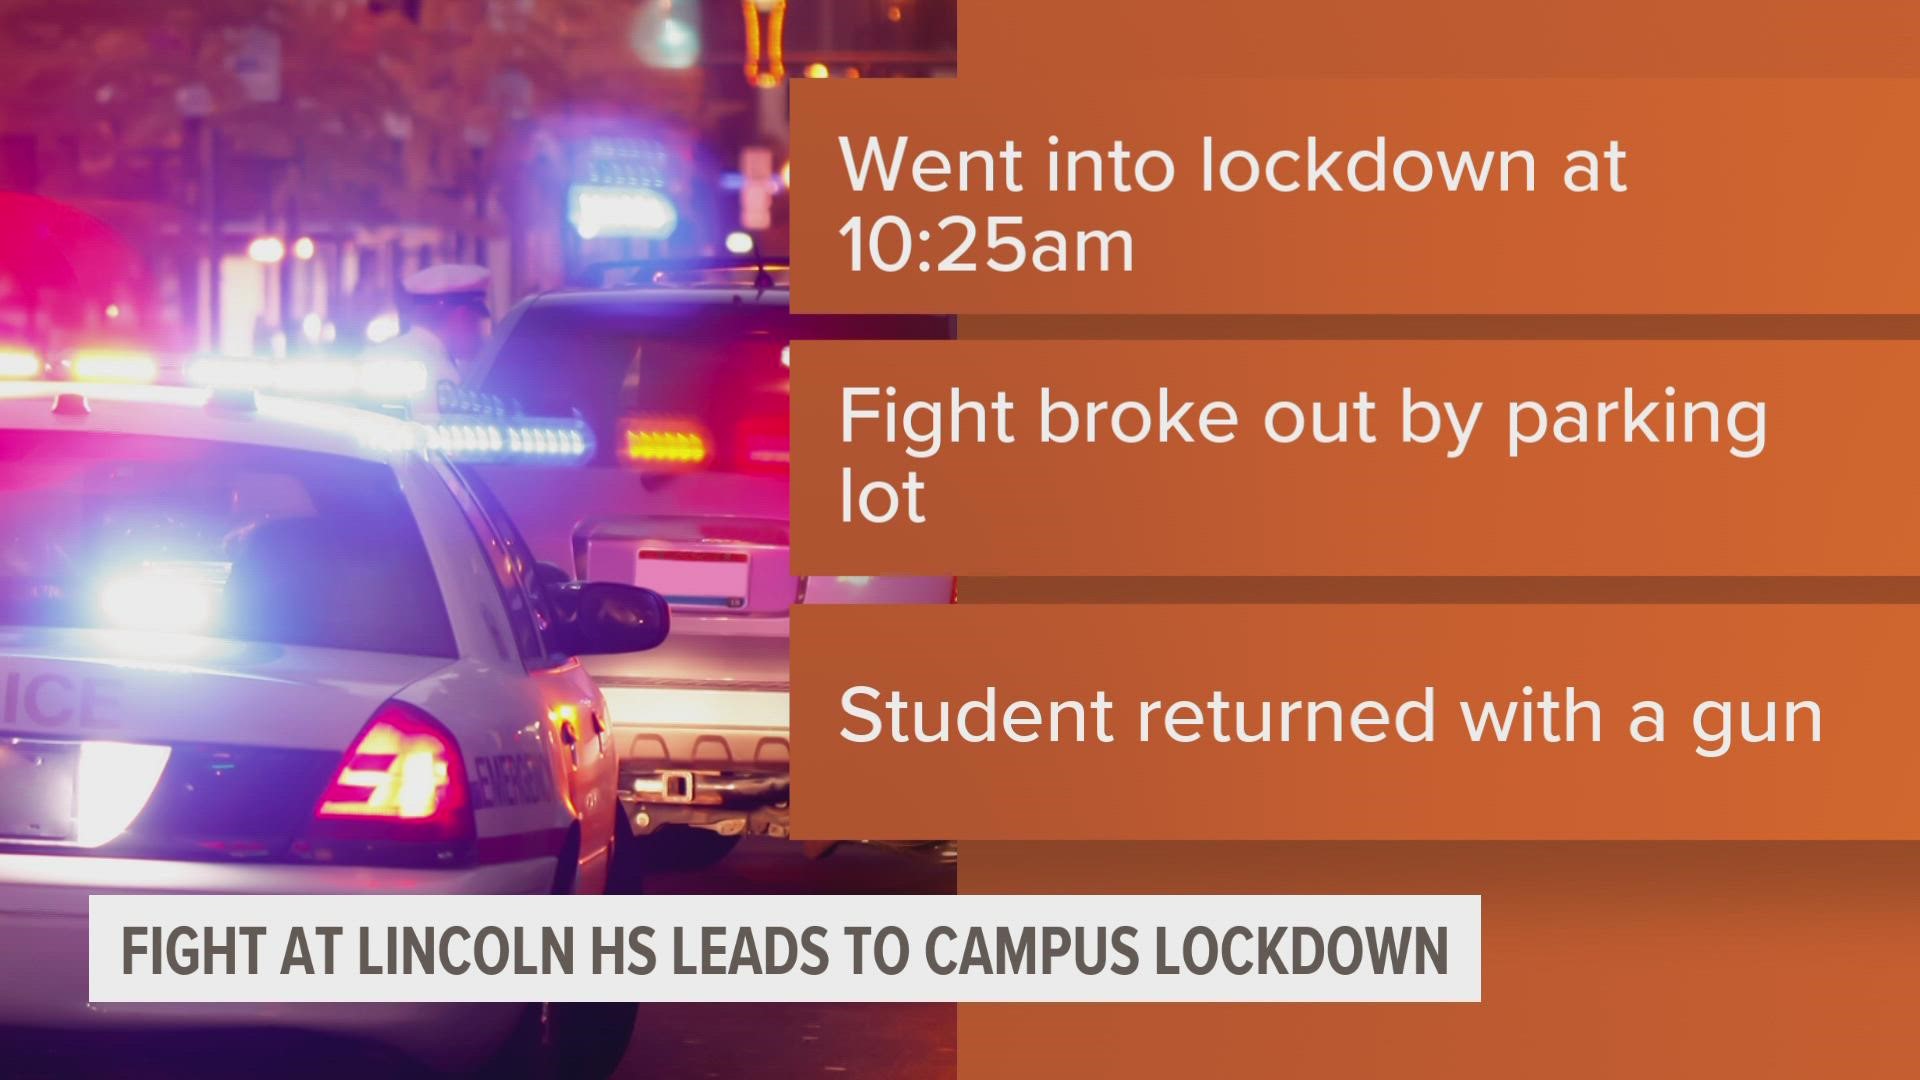 School officials did not determine if the gun was real or fake. The incident caused the school's third lockdown of 2022.